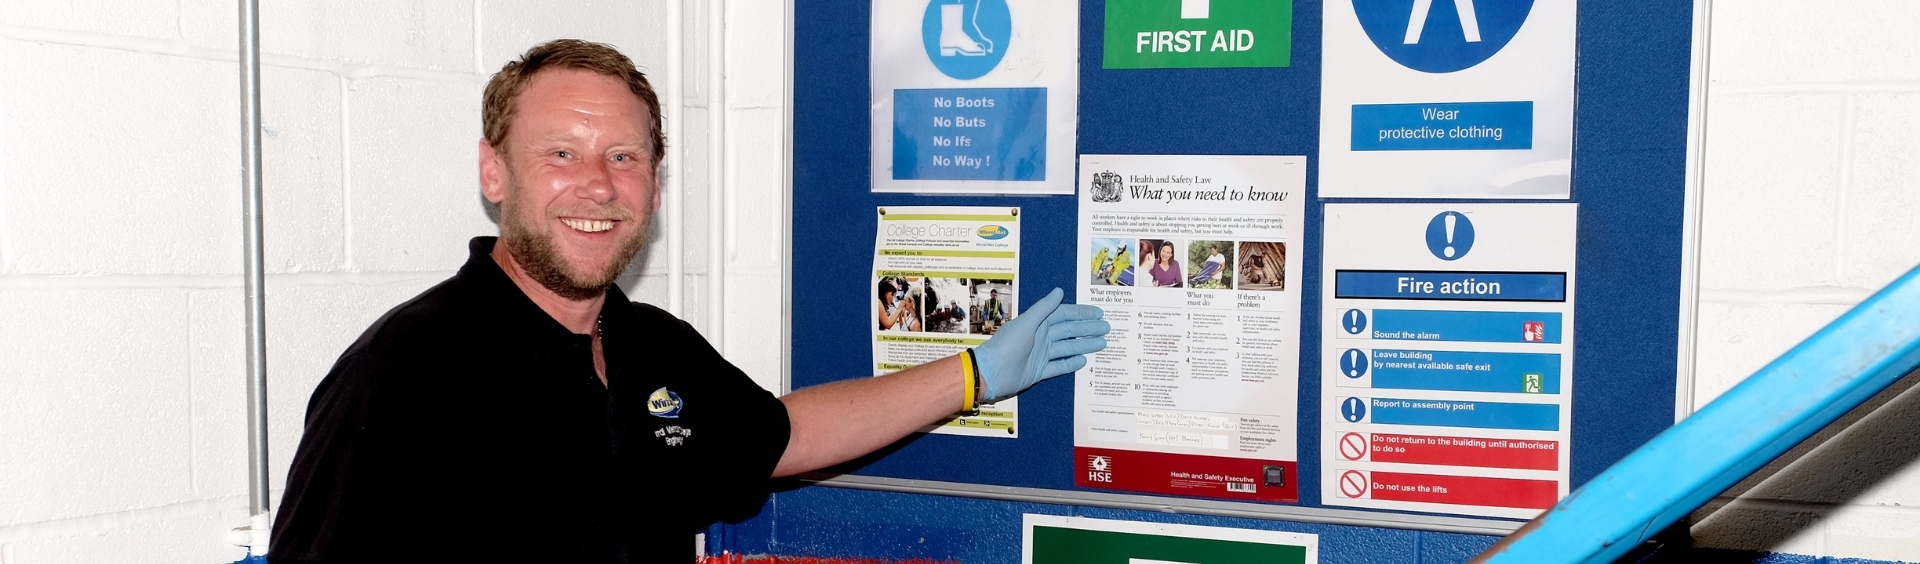 WMC Managing Safely student pointing at noticeboard in classroom